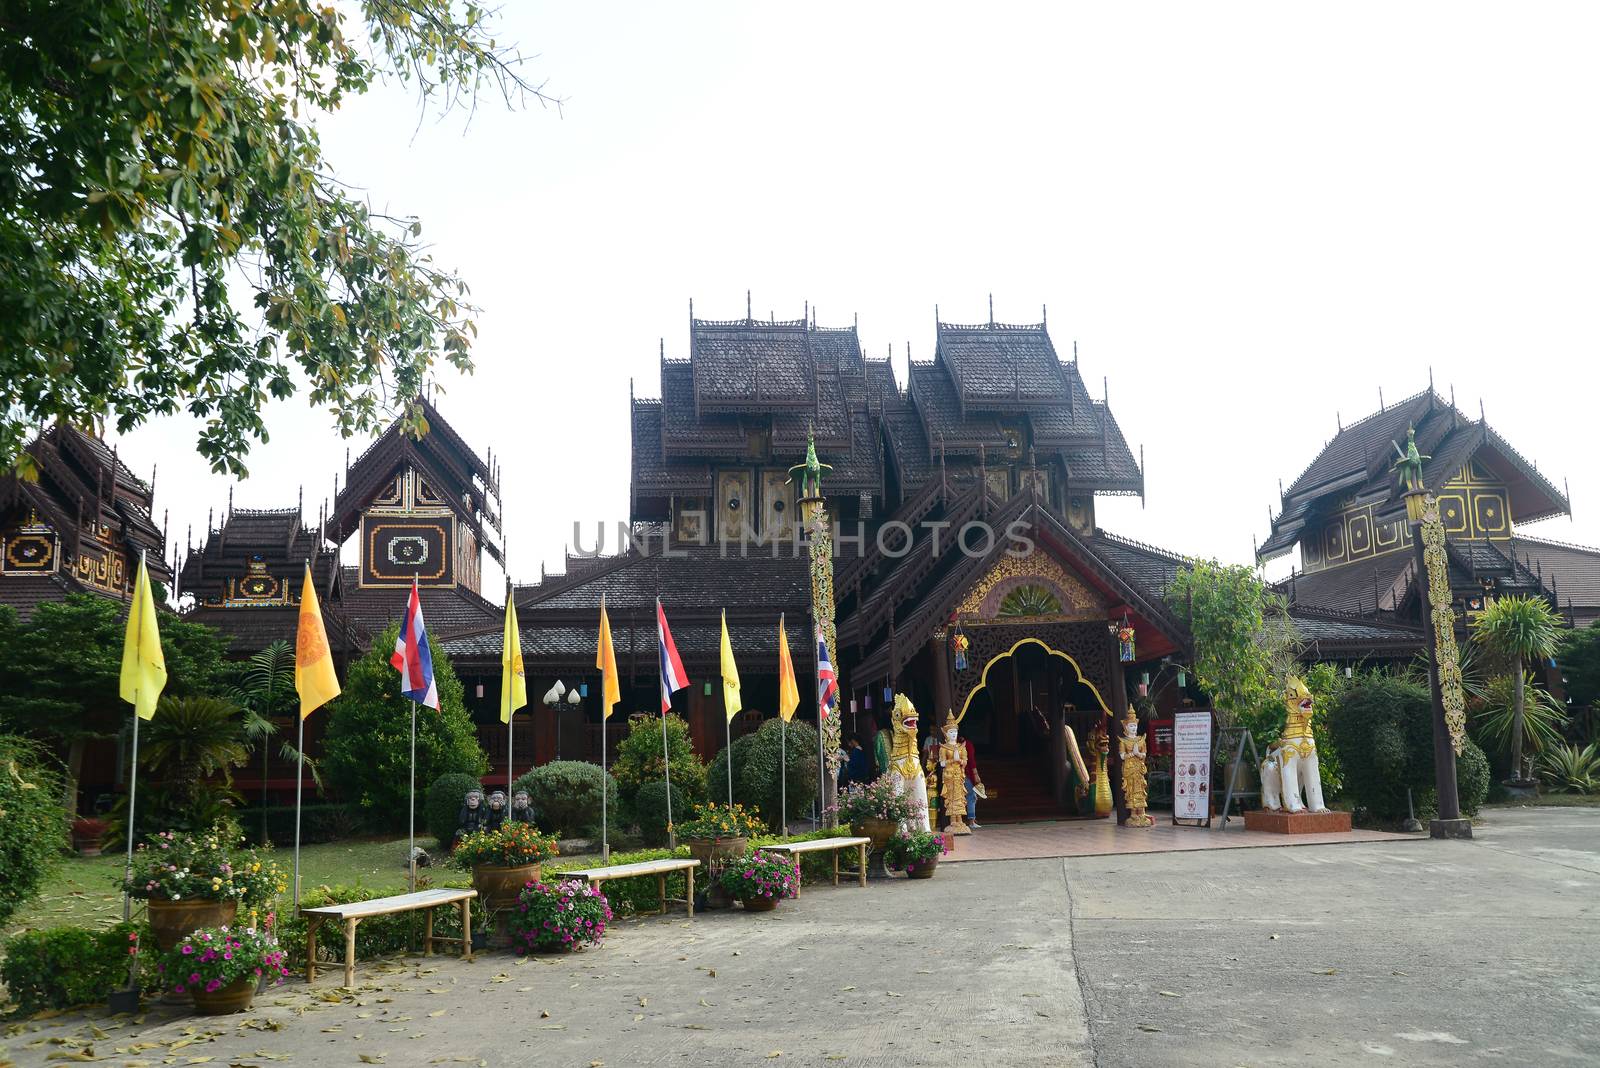 Phayao, Thailand  – 21 December, 2019 : Wat Nantaram is a Tai Yai (Shan-style) community temple in central Chiang Kham and exhibits the classic Tai Yai roof architecture, somewhat extraordinary